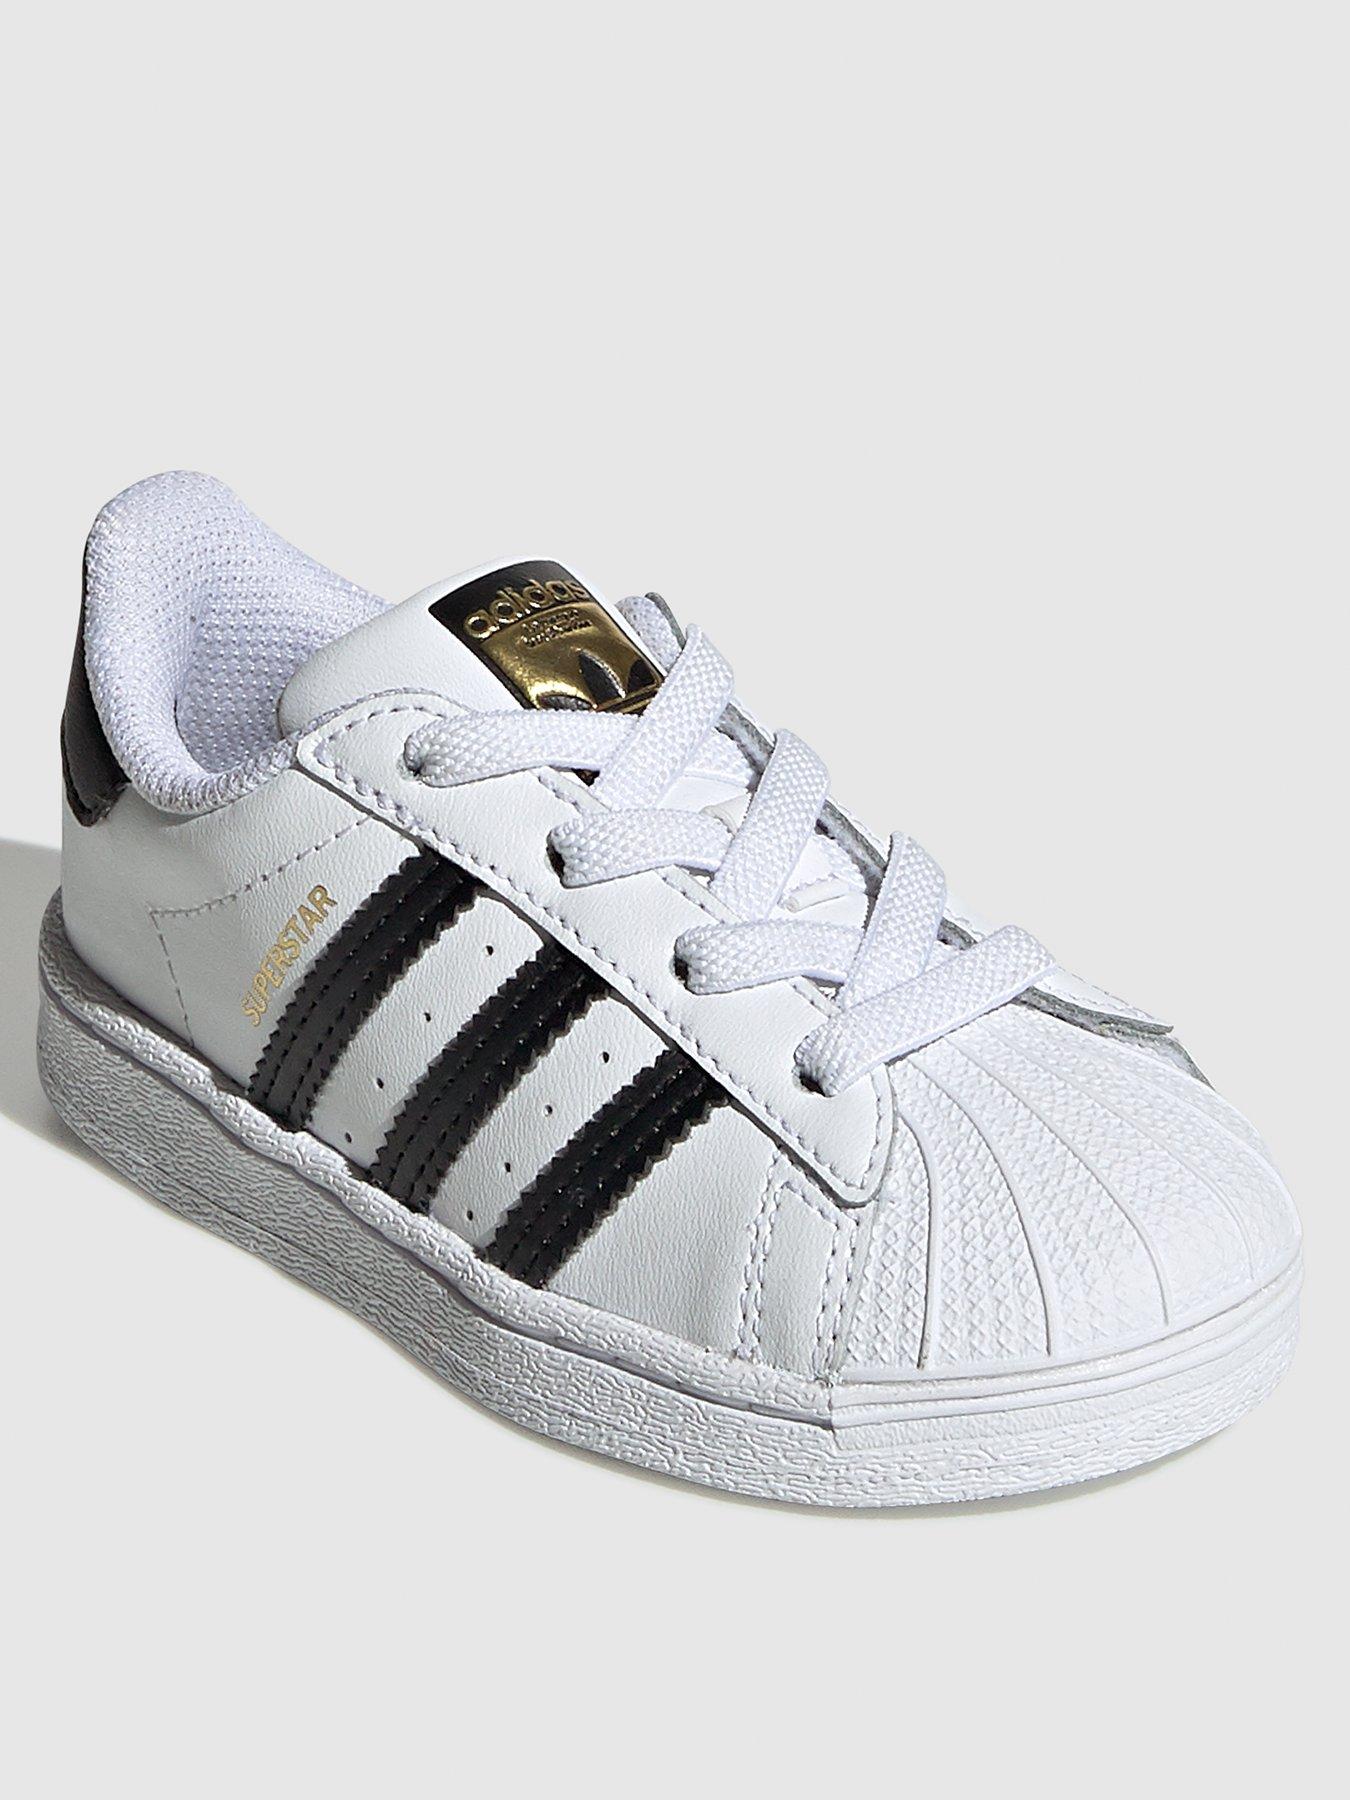 infant size 8 adidas trainers